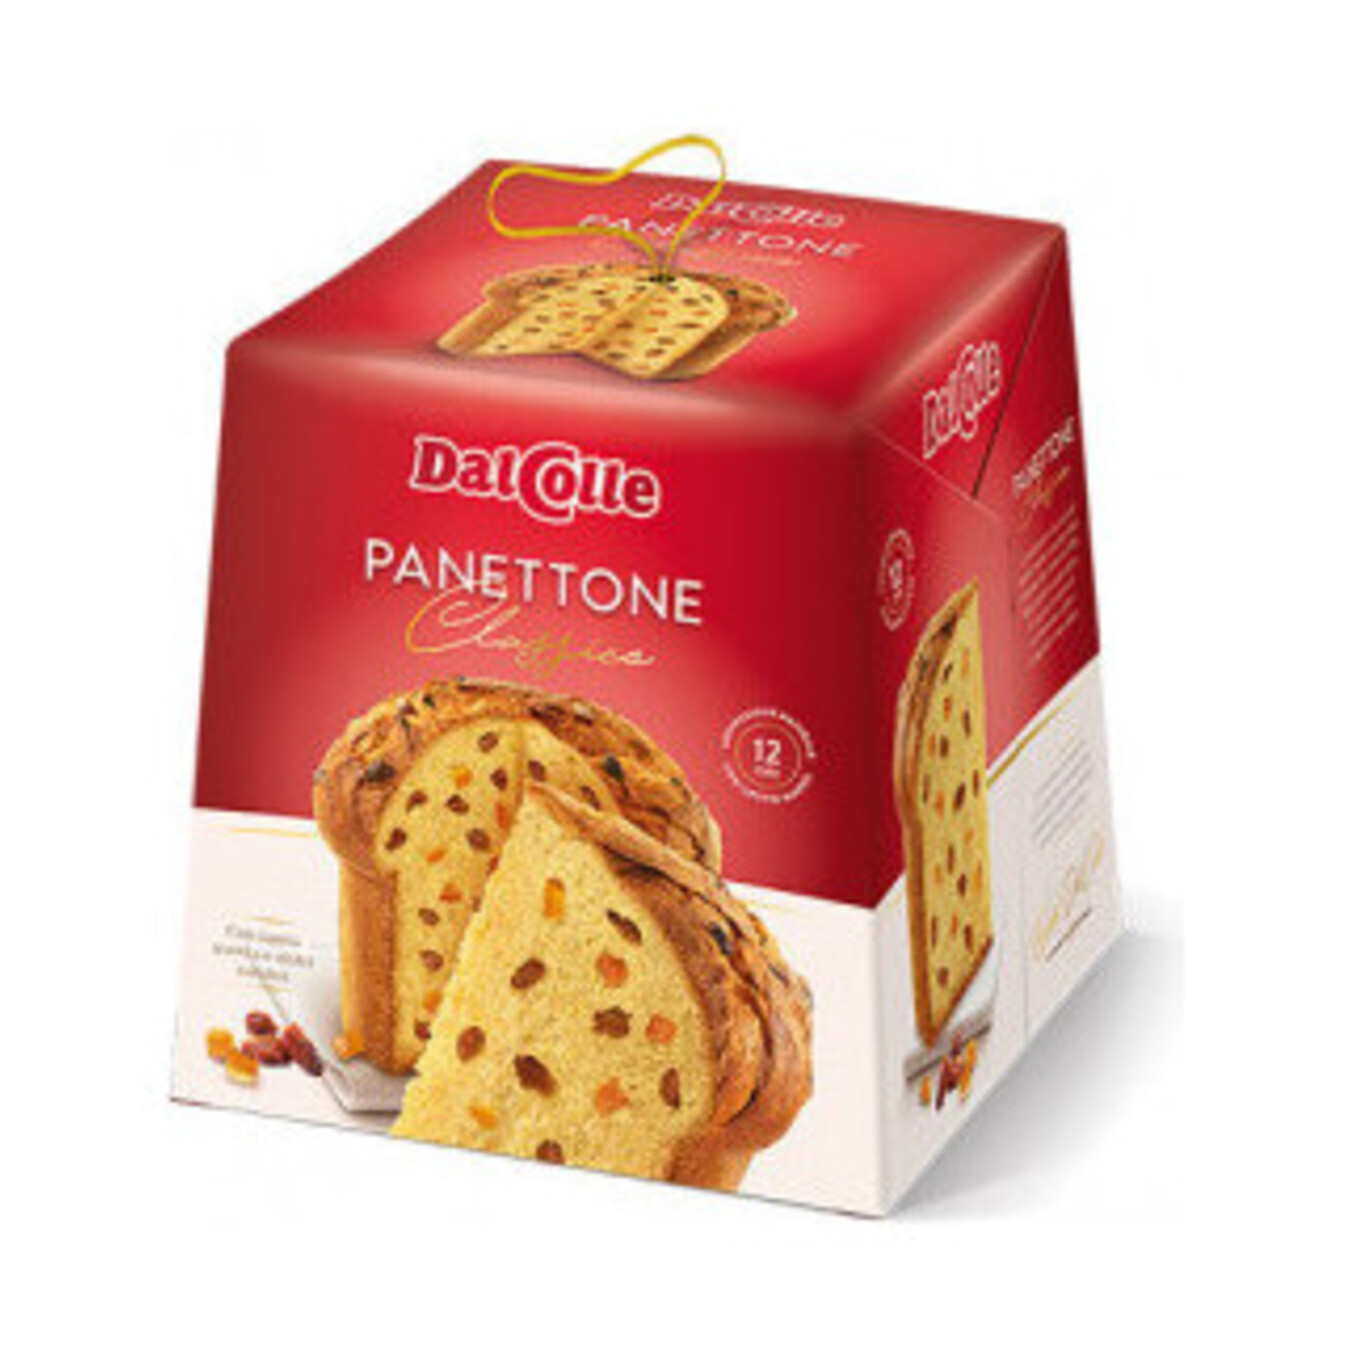 Dal Colle panettone with candied orange 750g